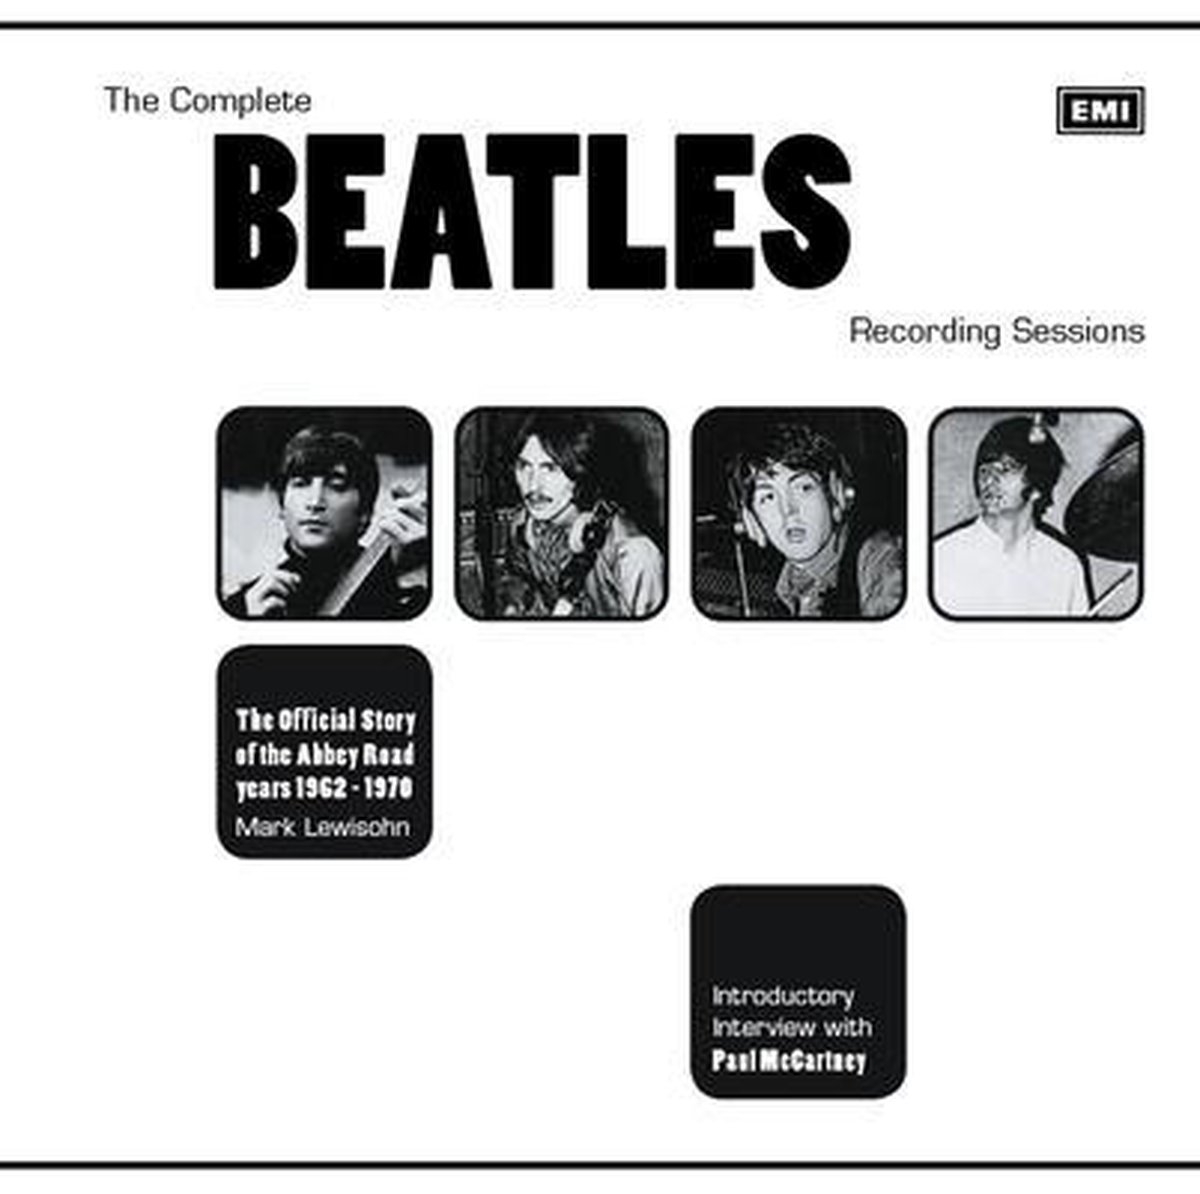 The Complete Beatles Recording Sessions: The Official Story of the Abbey Road Years 1962-1970 - Mark Lewisohn